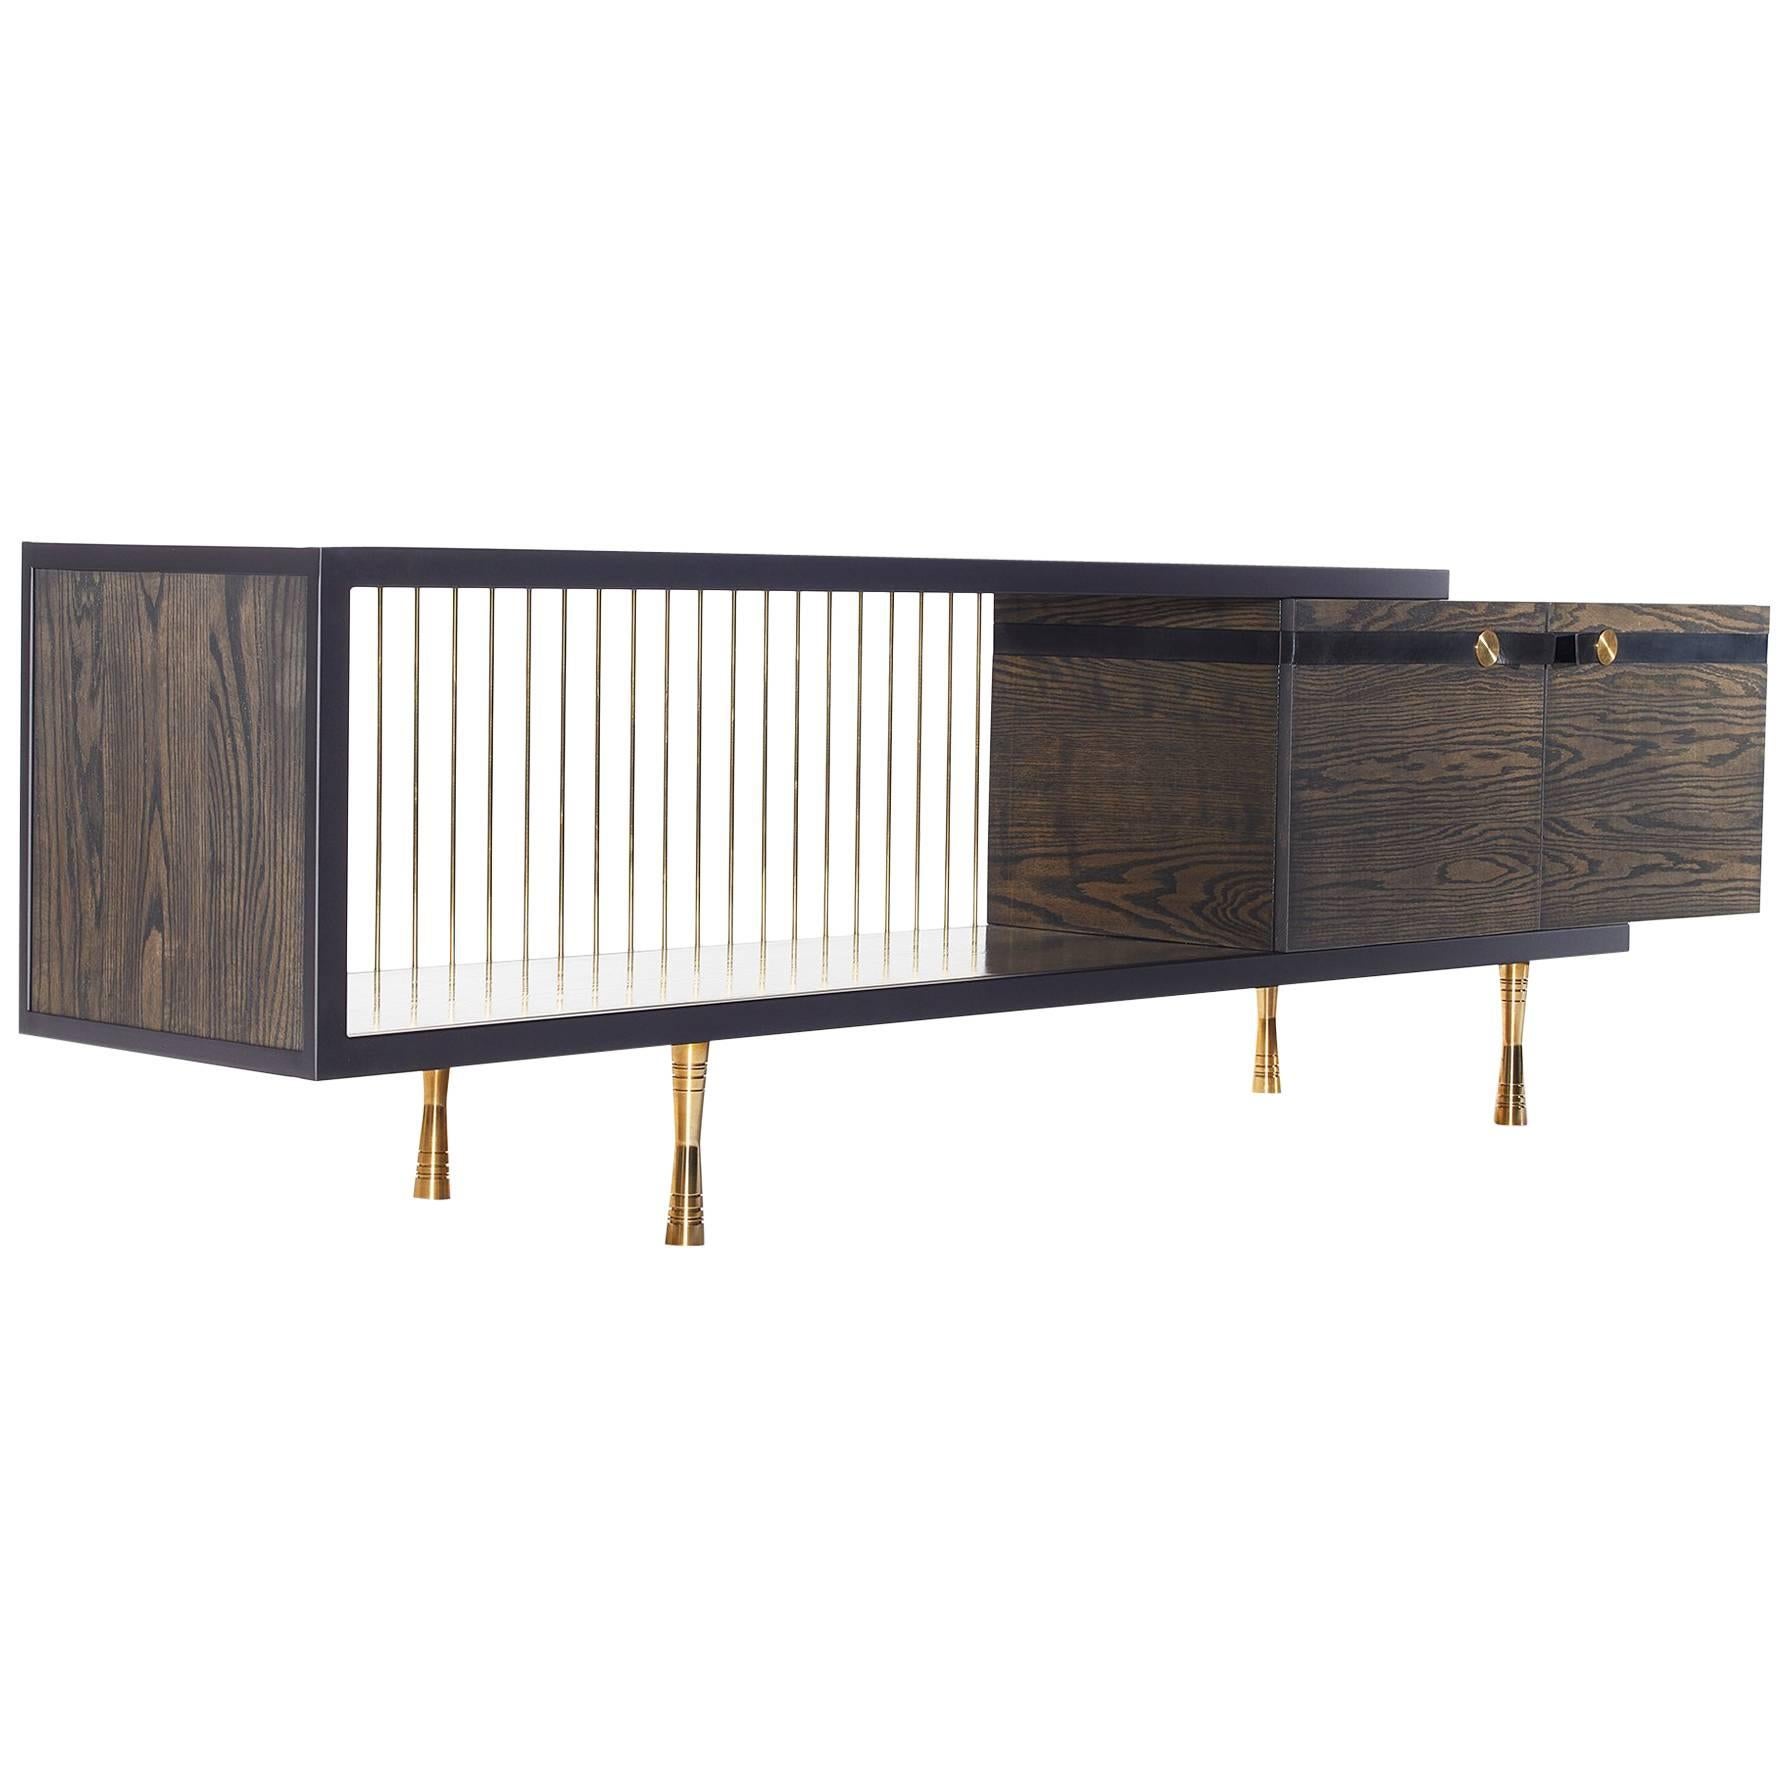 Viga Console in Red Oak, Steel, Leather and Brass 2017 by Post & Gleam For Sale